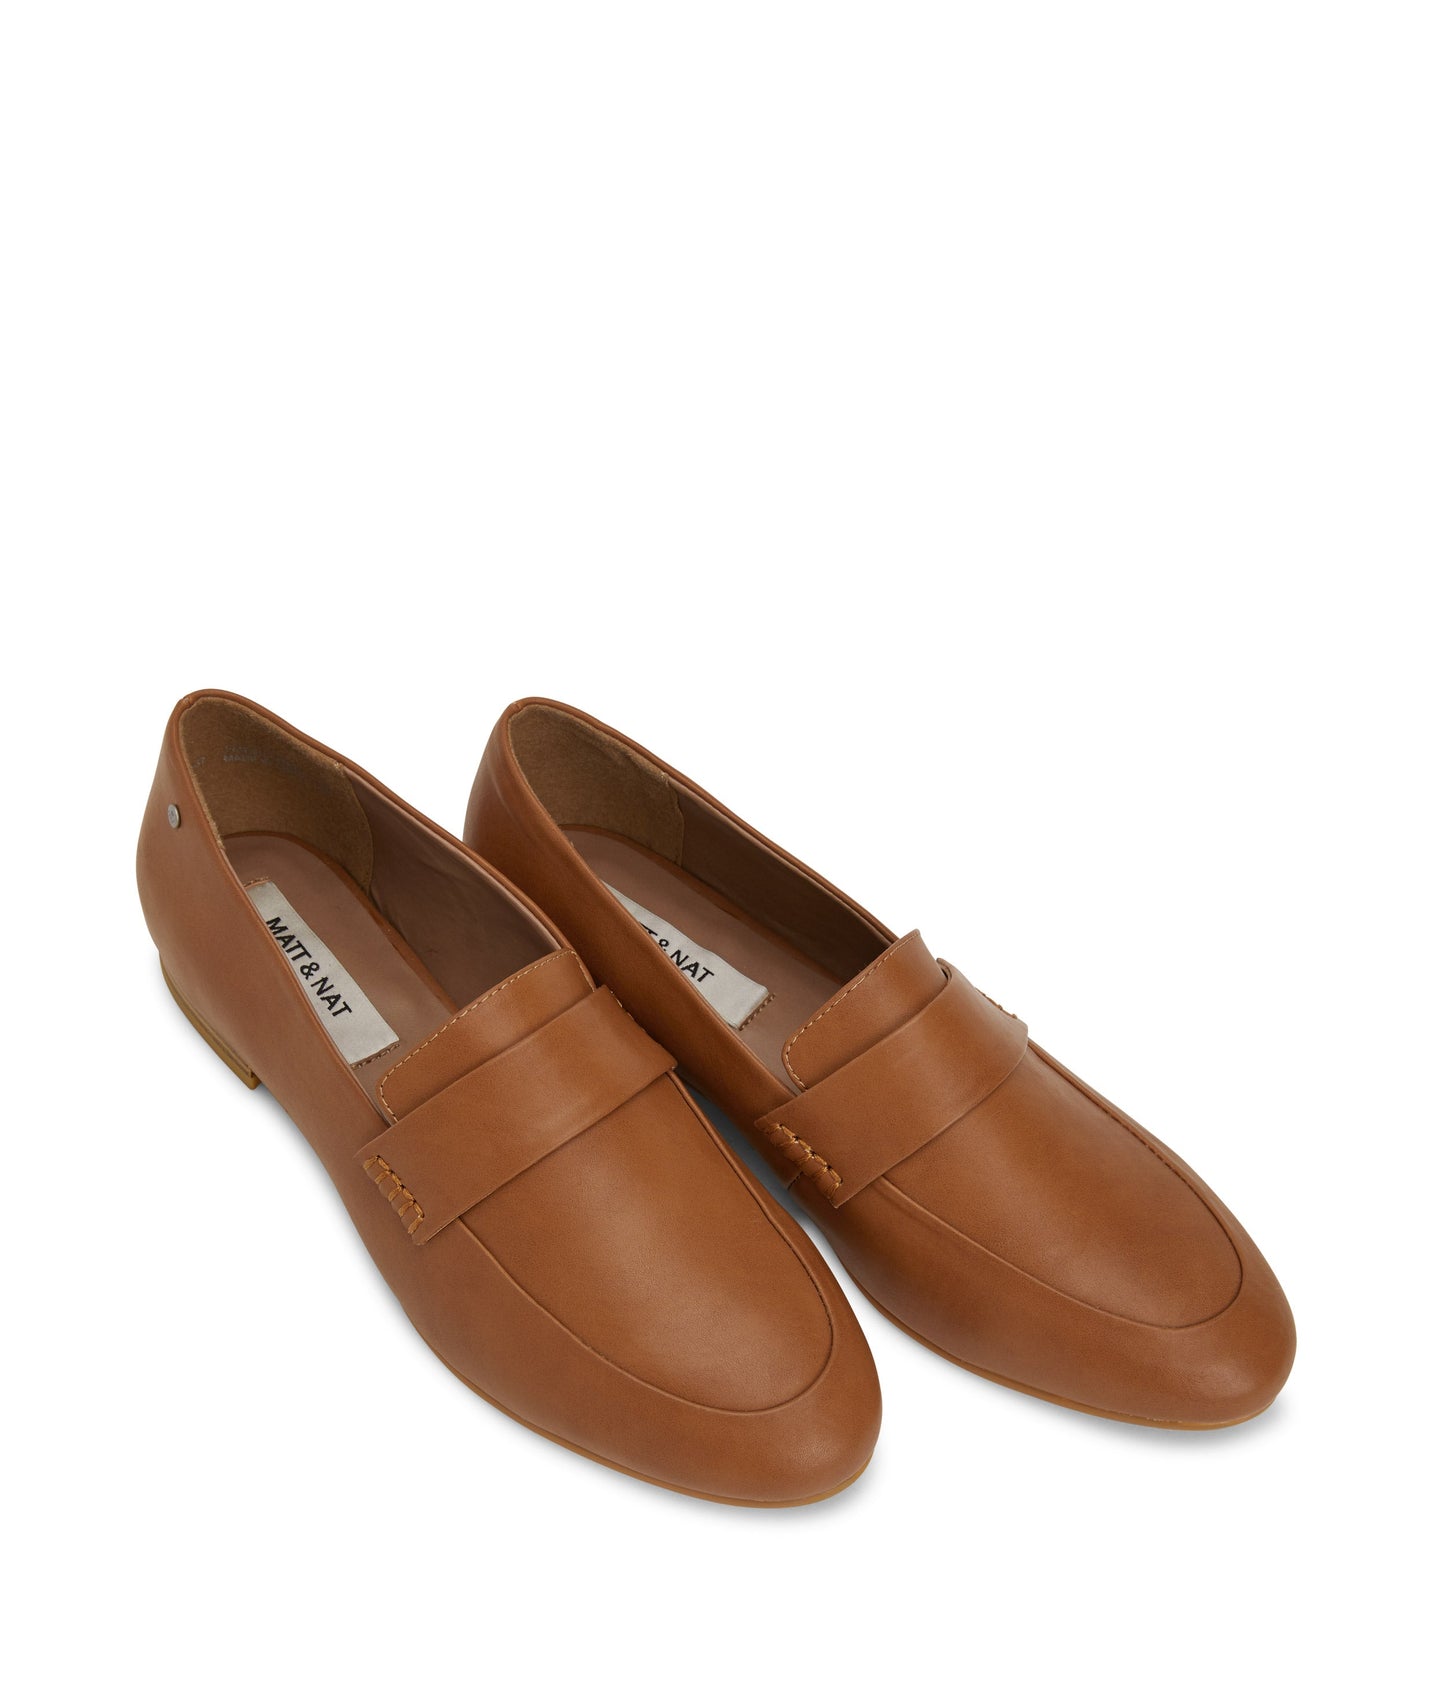 IVY Women's Vegan Loafers | Color: Brown - variant::chili